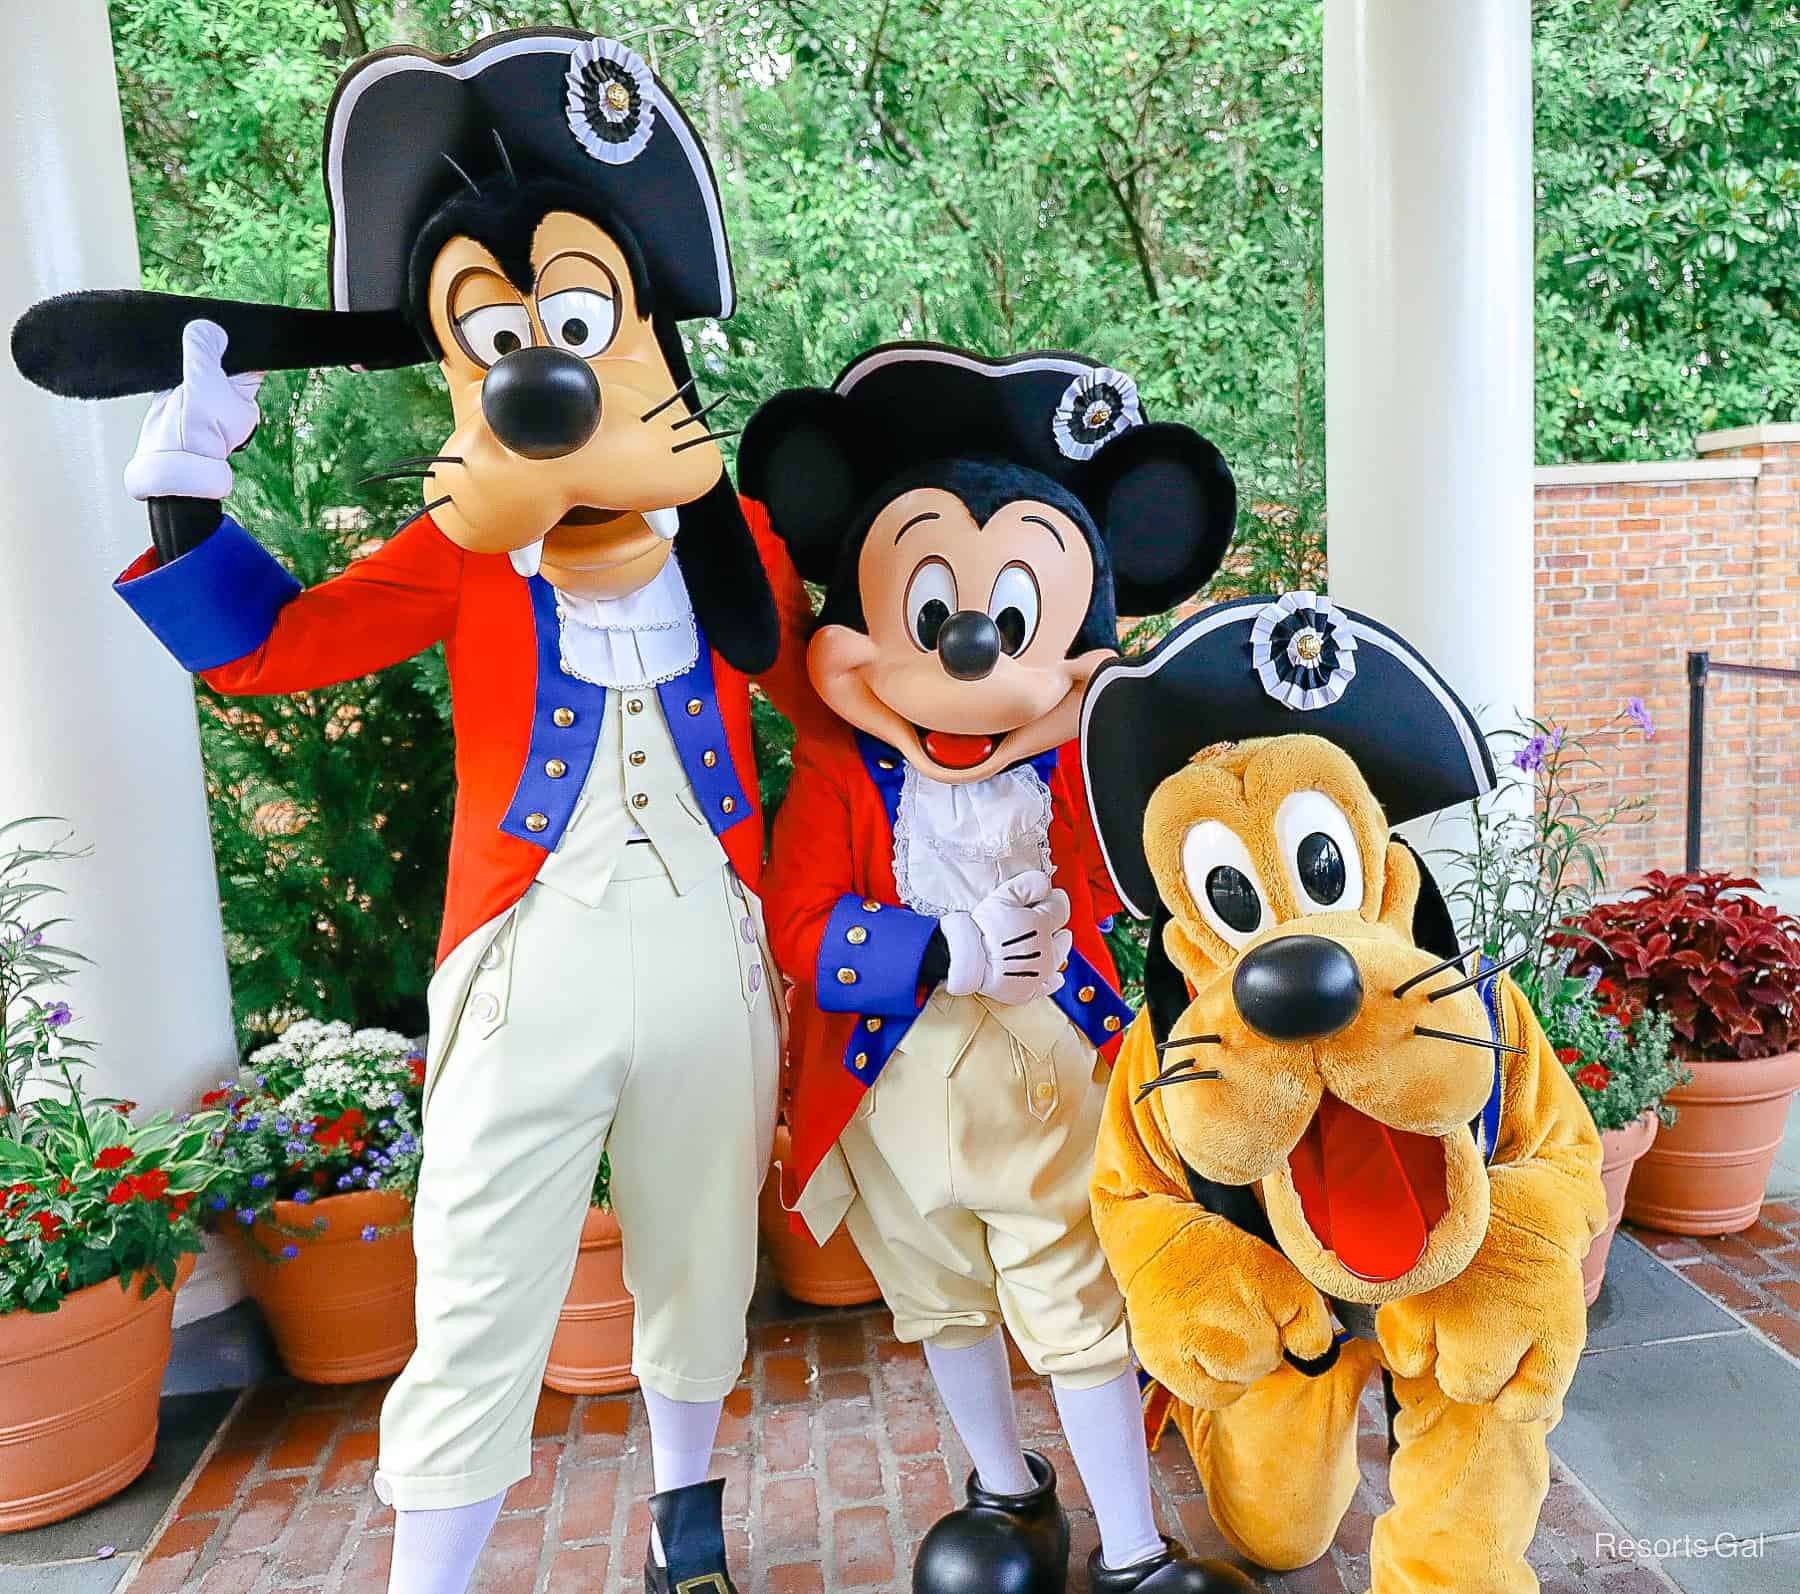 Mickey Mouse, Goofy, and Pluto in patriotic costumes at Epcot on the 4th of July 